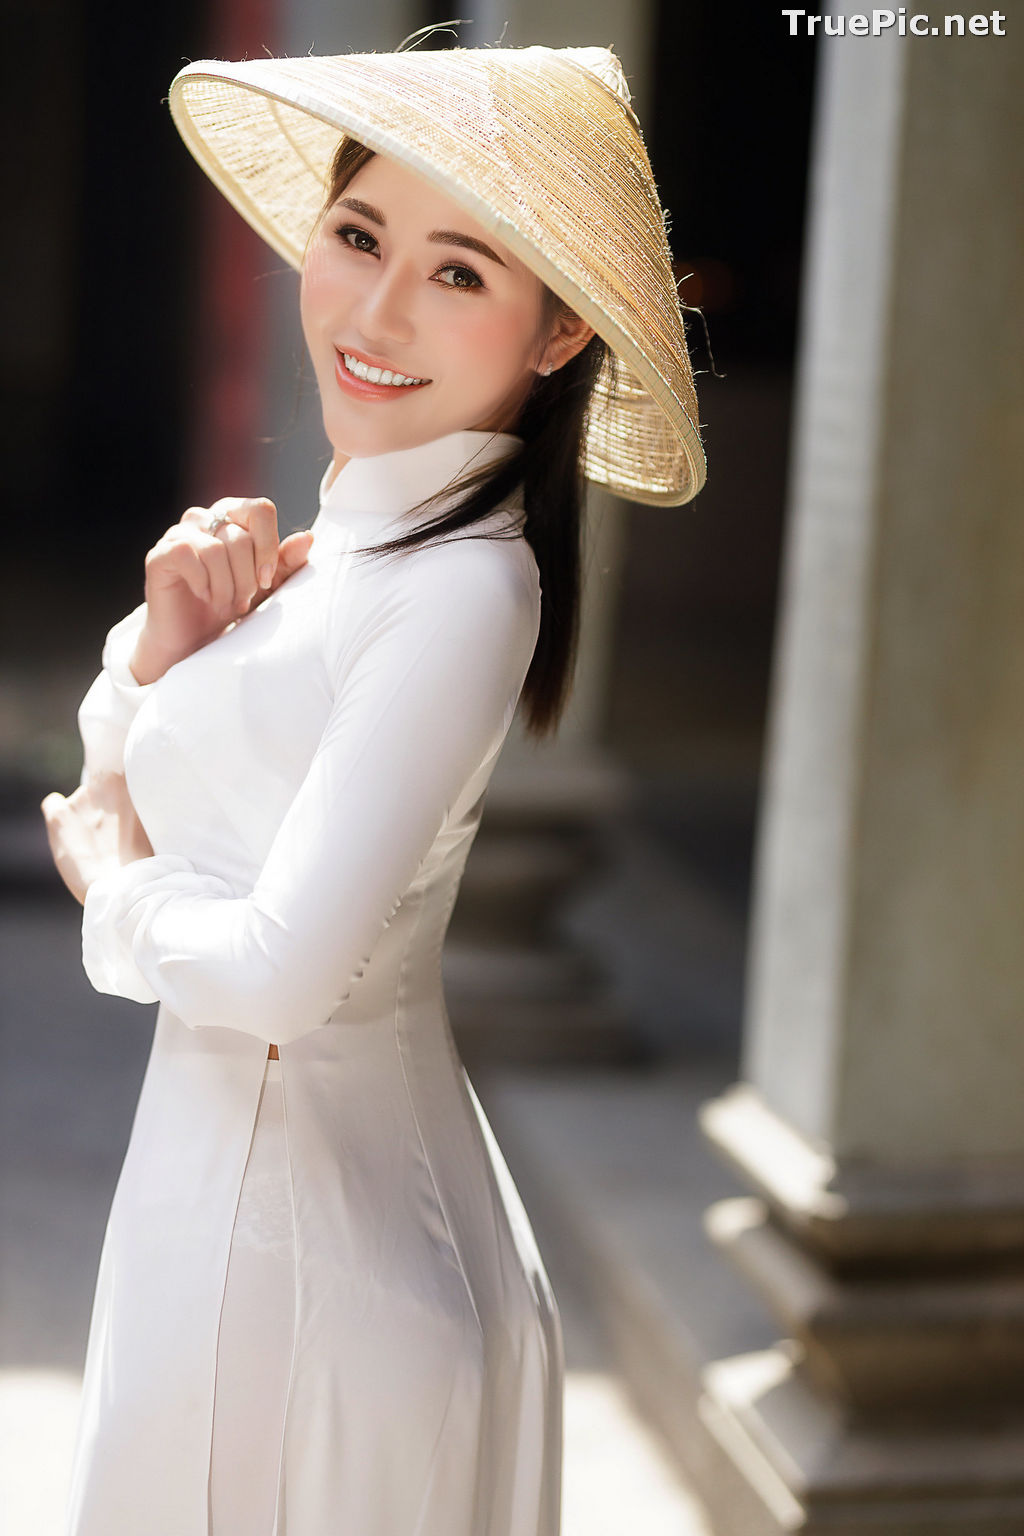 Image The Beauty of Vietnamese Girls with Traditional Dress (Ao Dai) #2 - TruePic.net - Picture-85